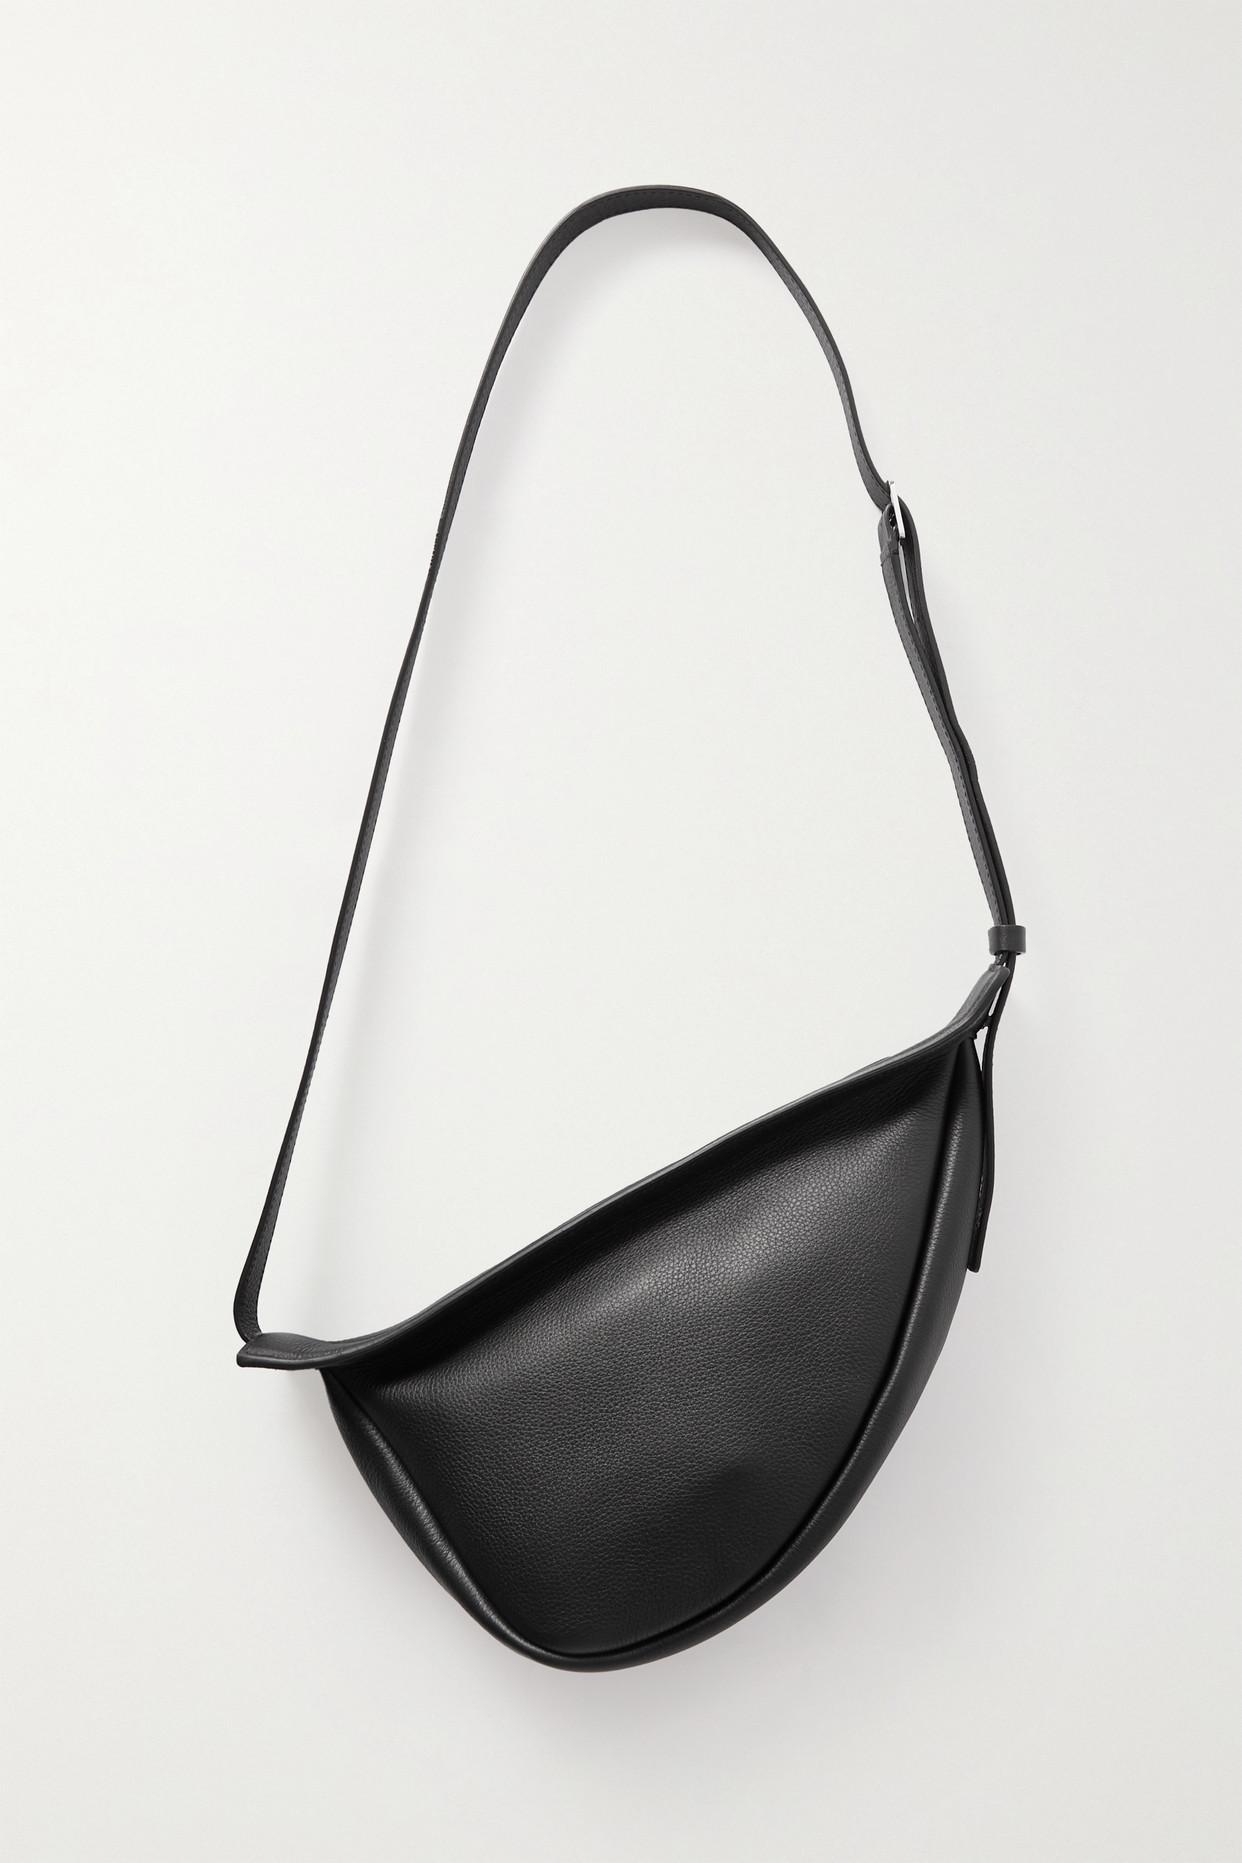 THE ROW Large Slouchy Banana Bag in Luxe Grain Leather - Bergdorf